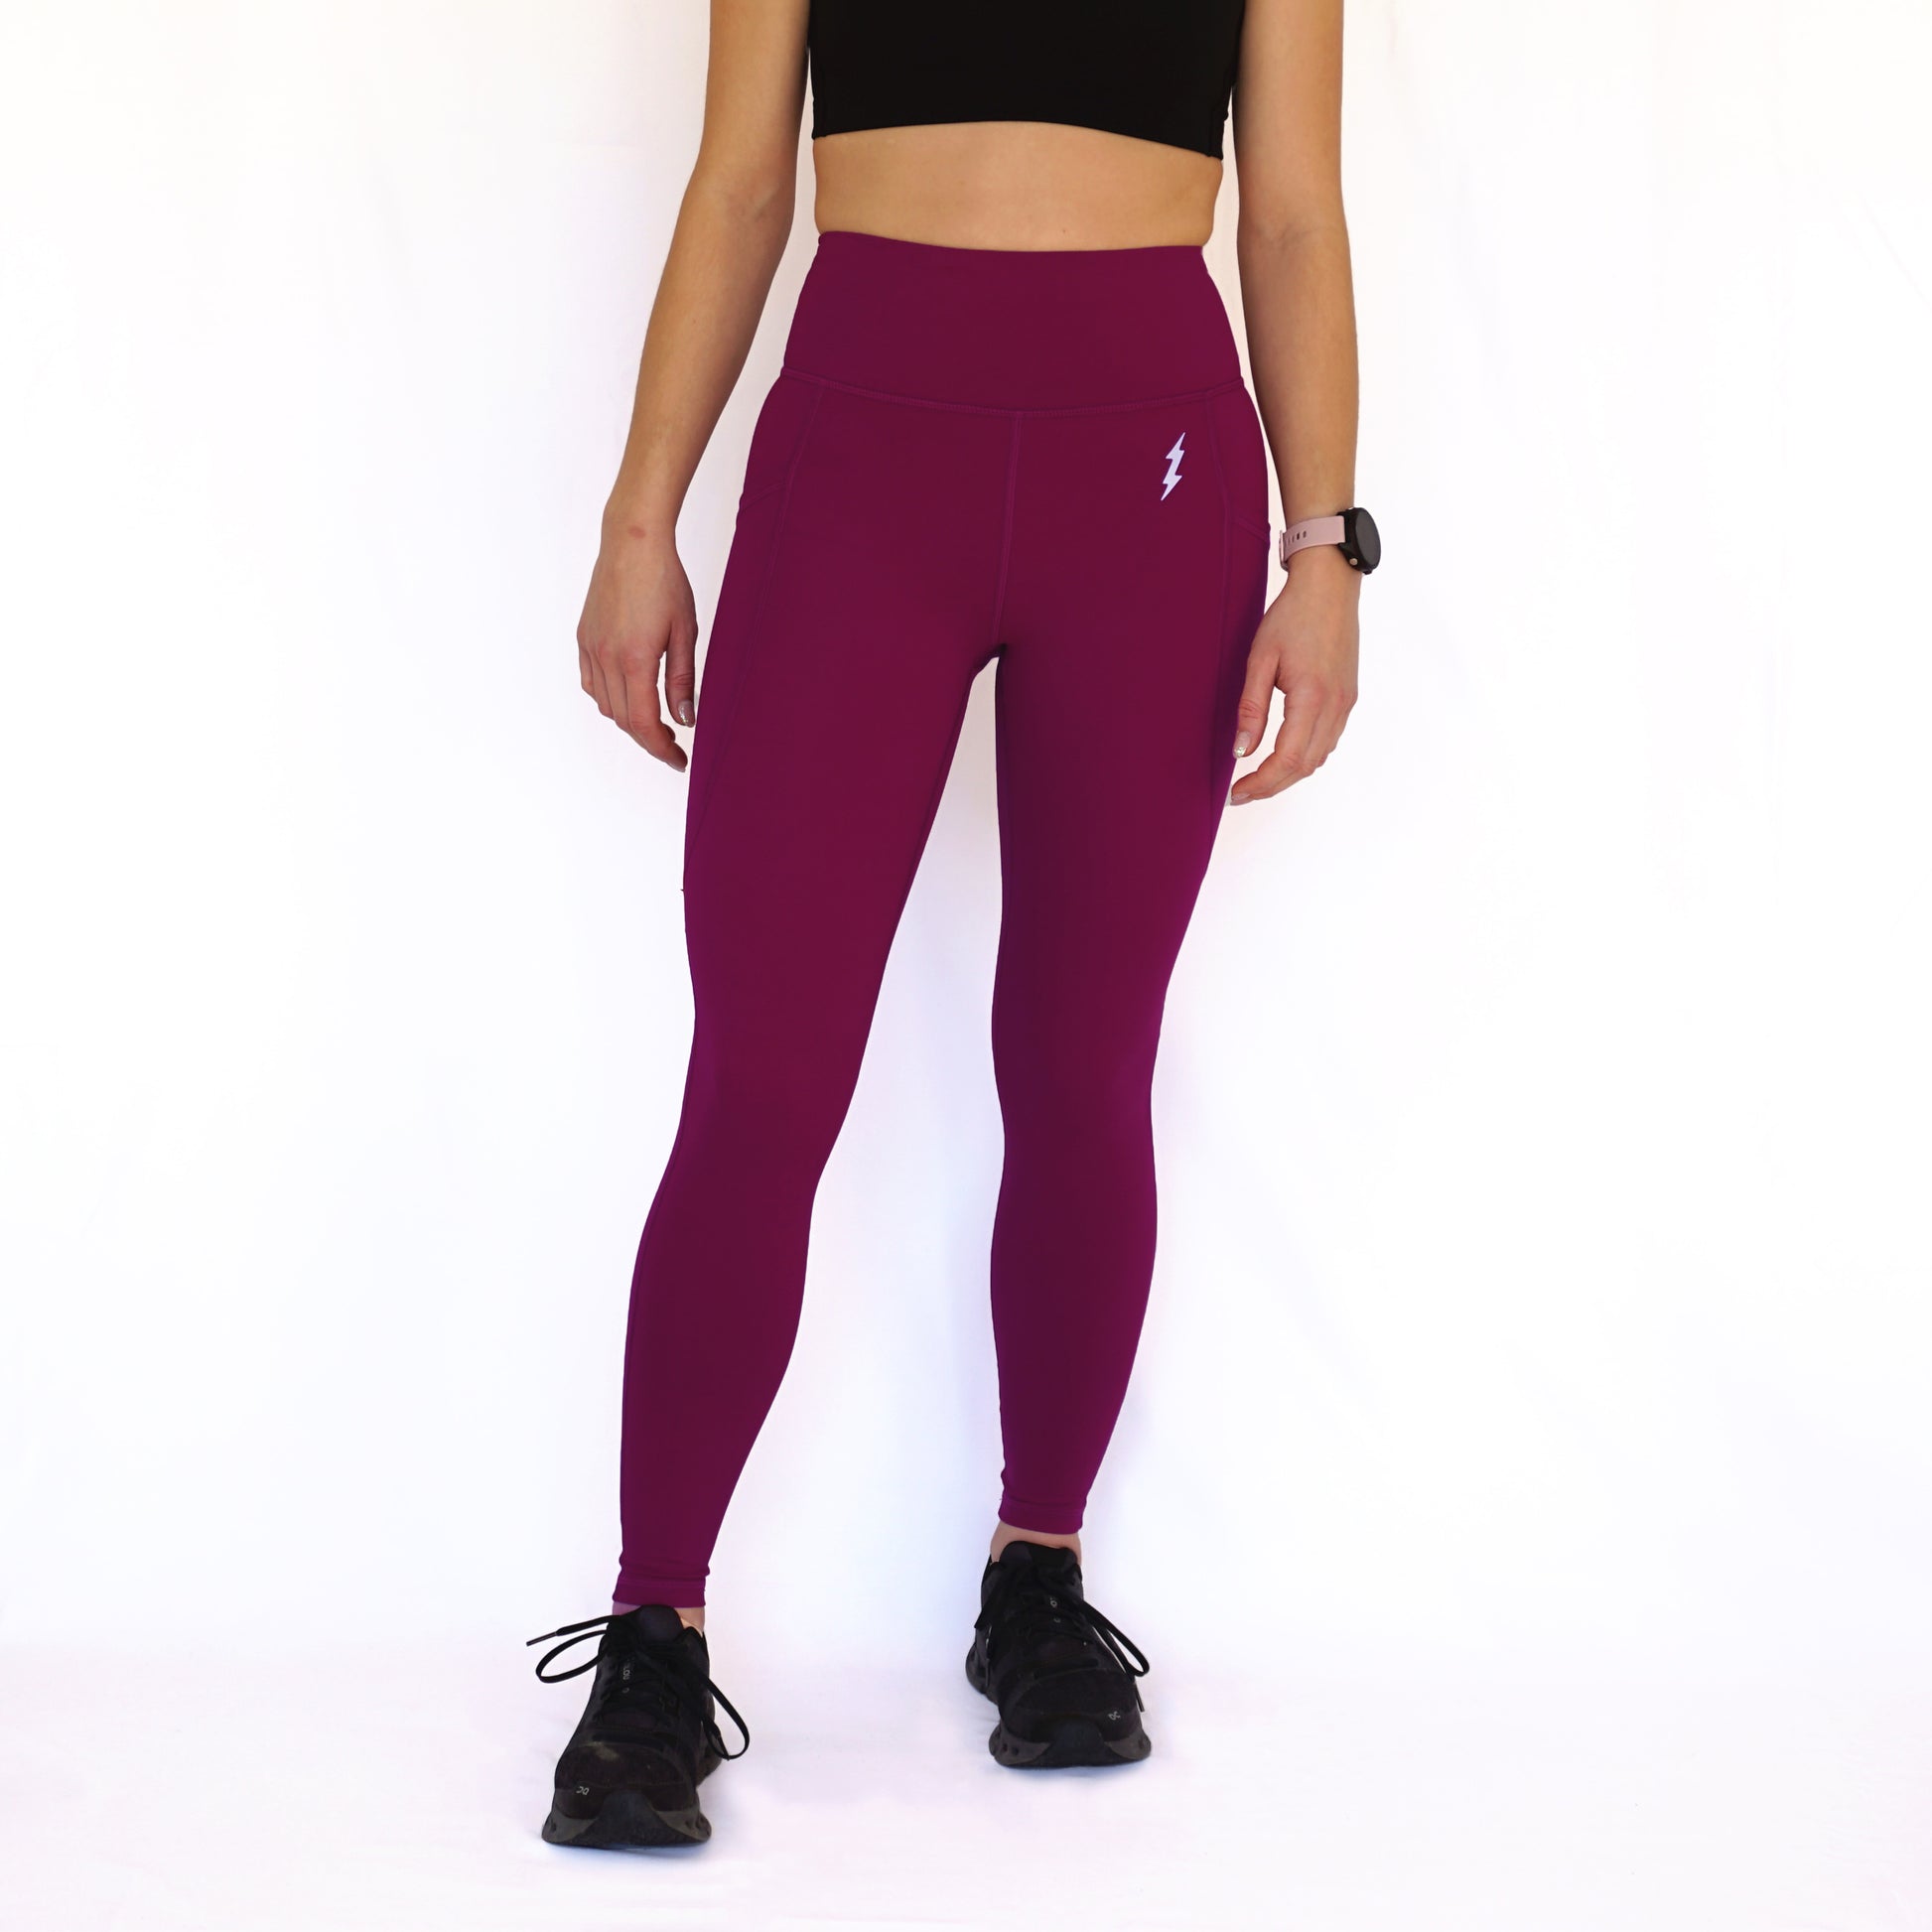 Check out these side by side - ZYIA activewear with JennB